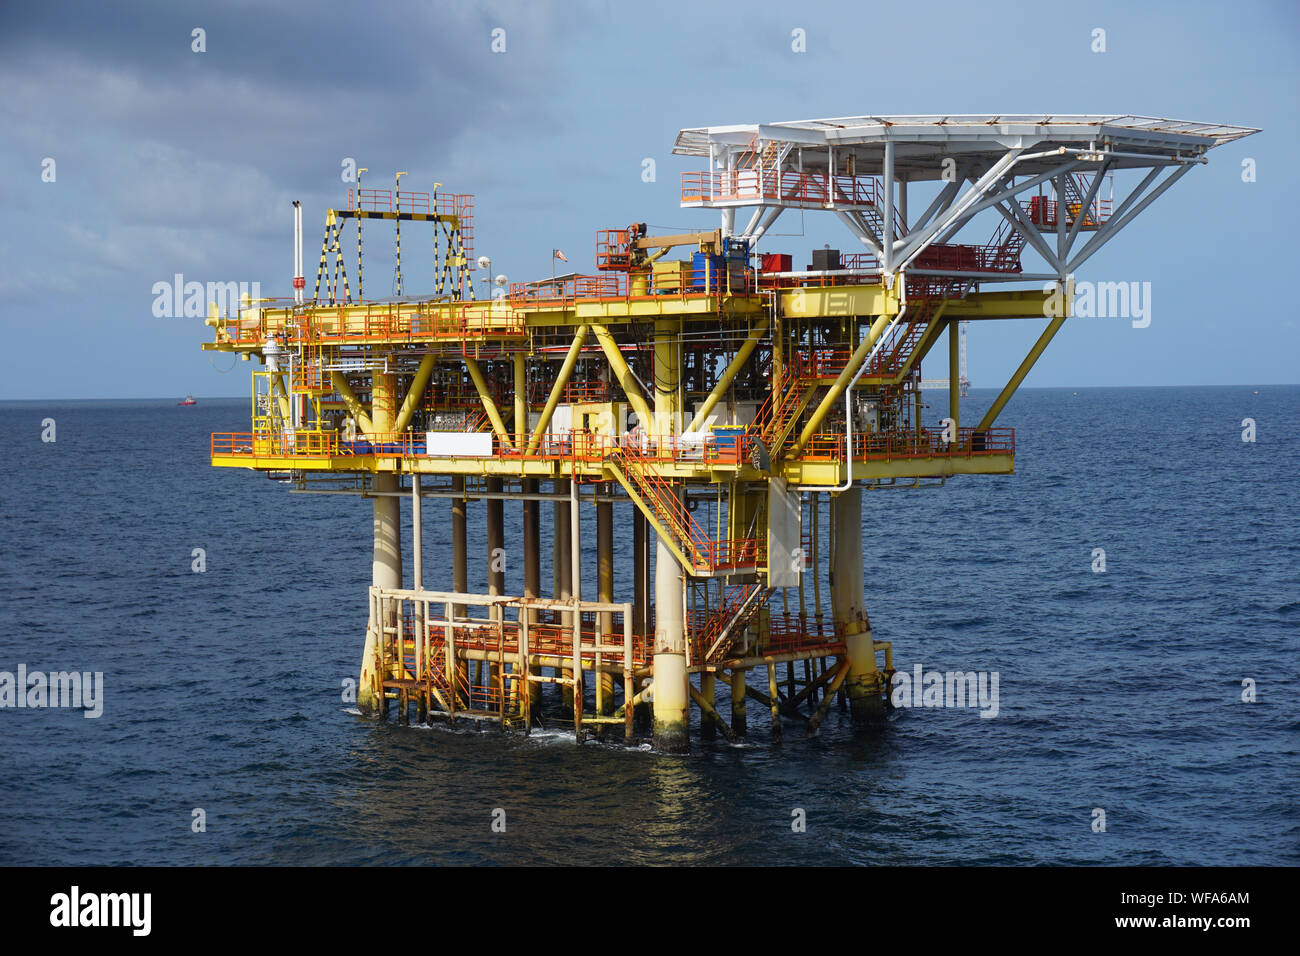 Offshore Platform In Sea Against Sky Stock Photo